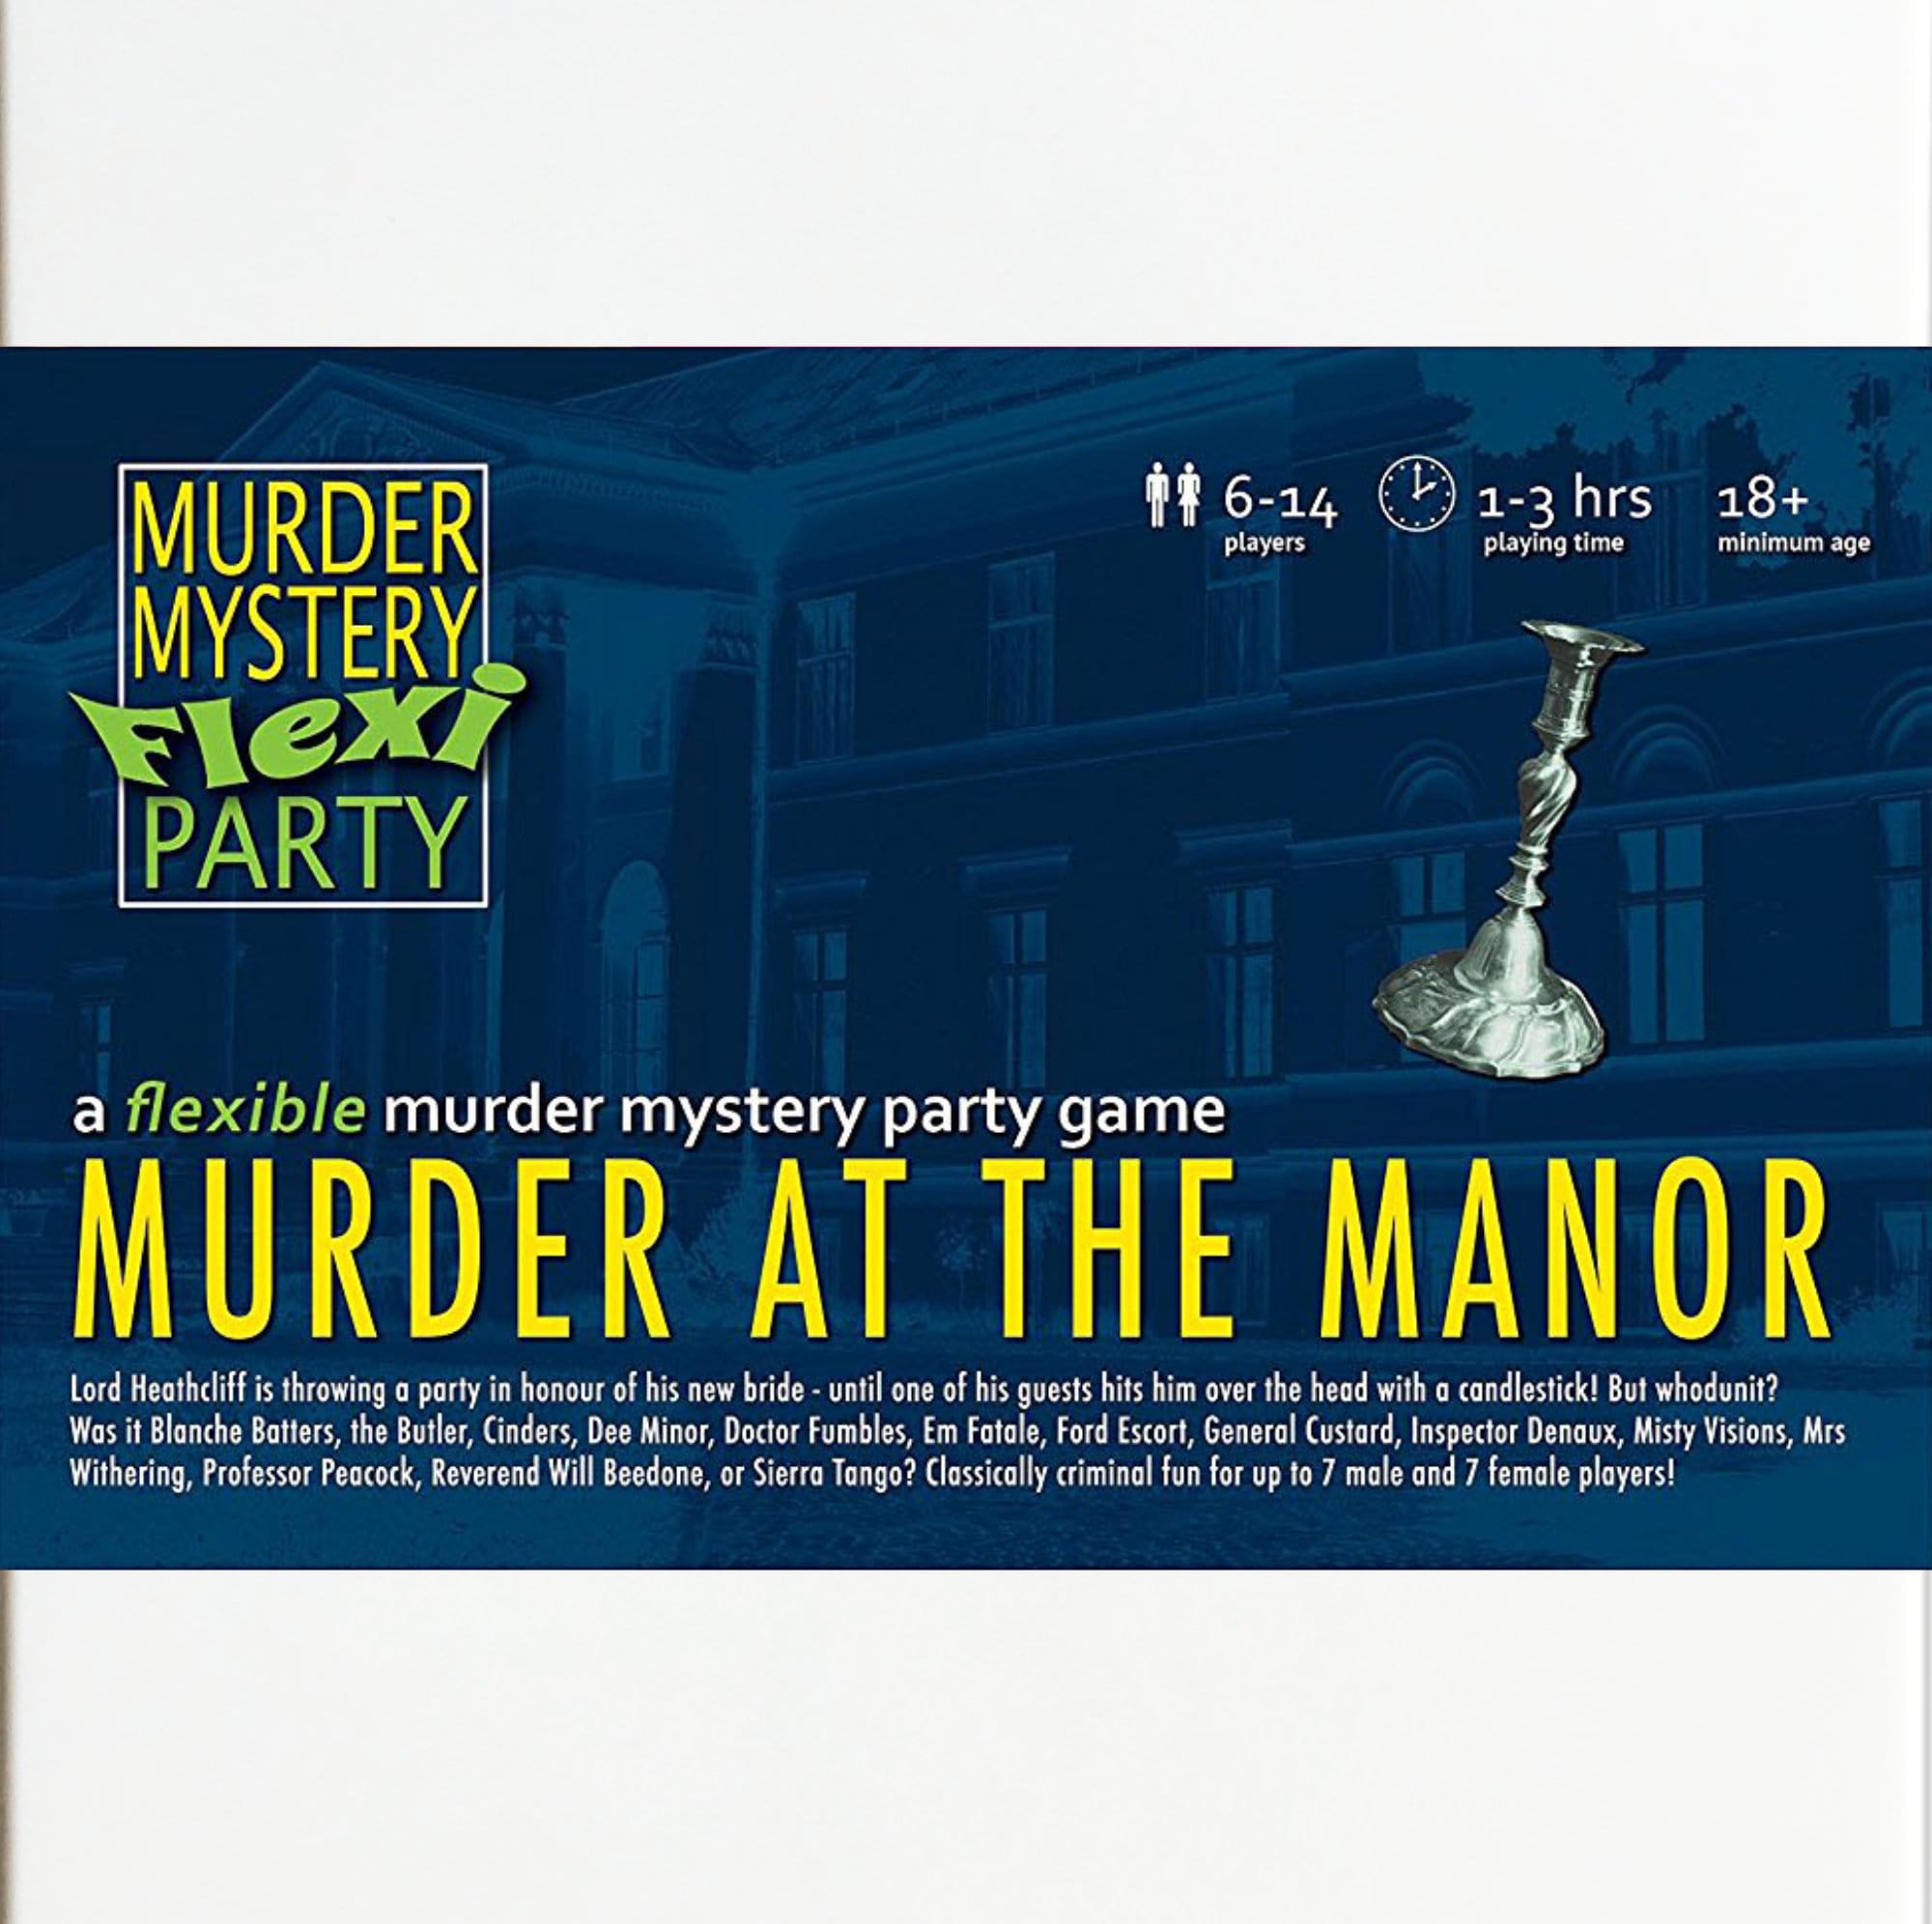 Whodunnit murder mystery arrives in April